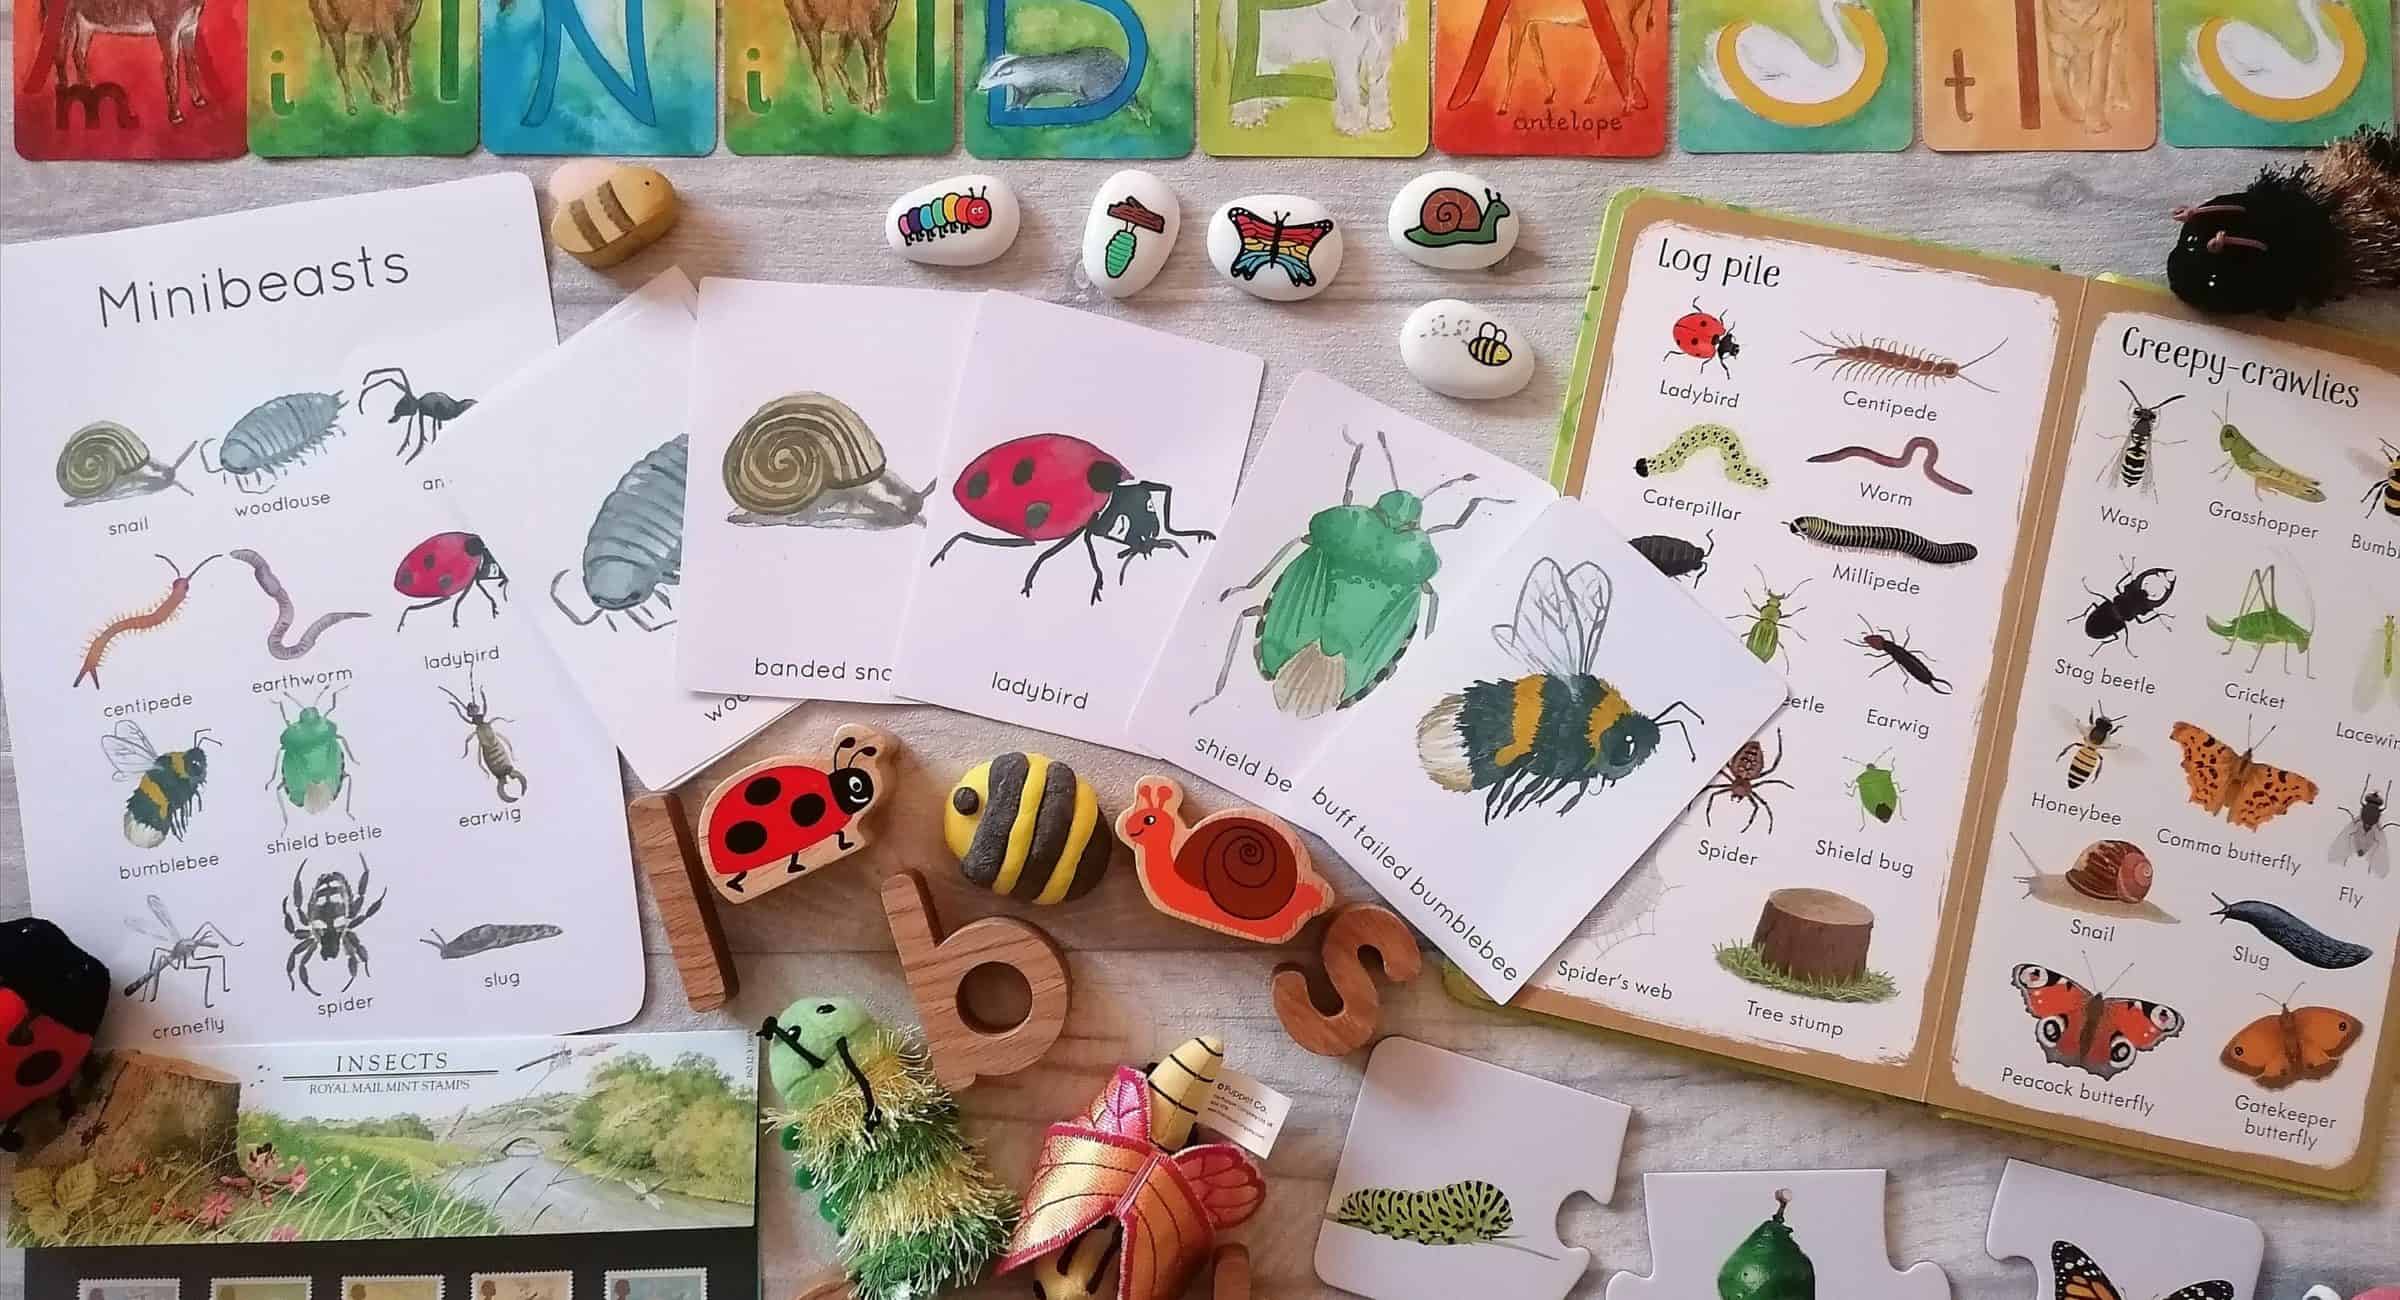 Selection of minibeast resources for nature exploring